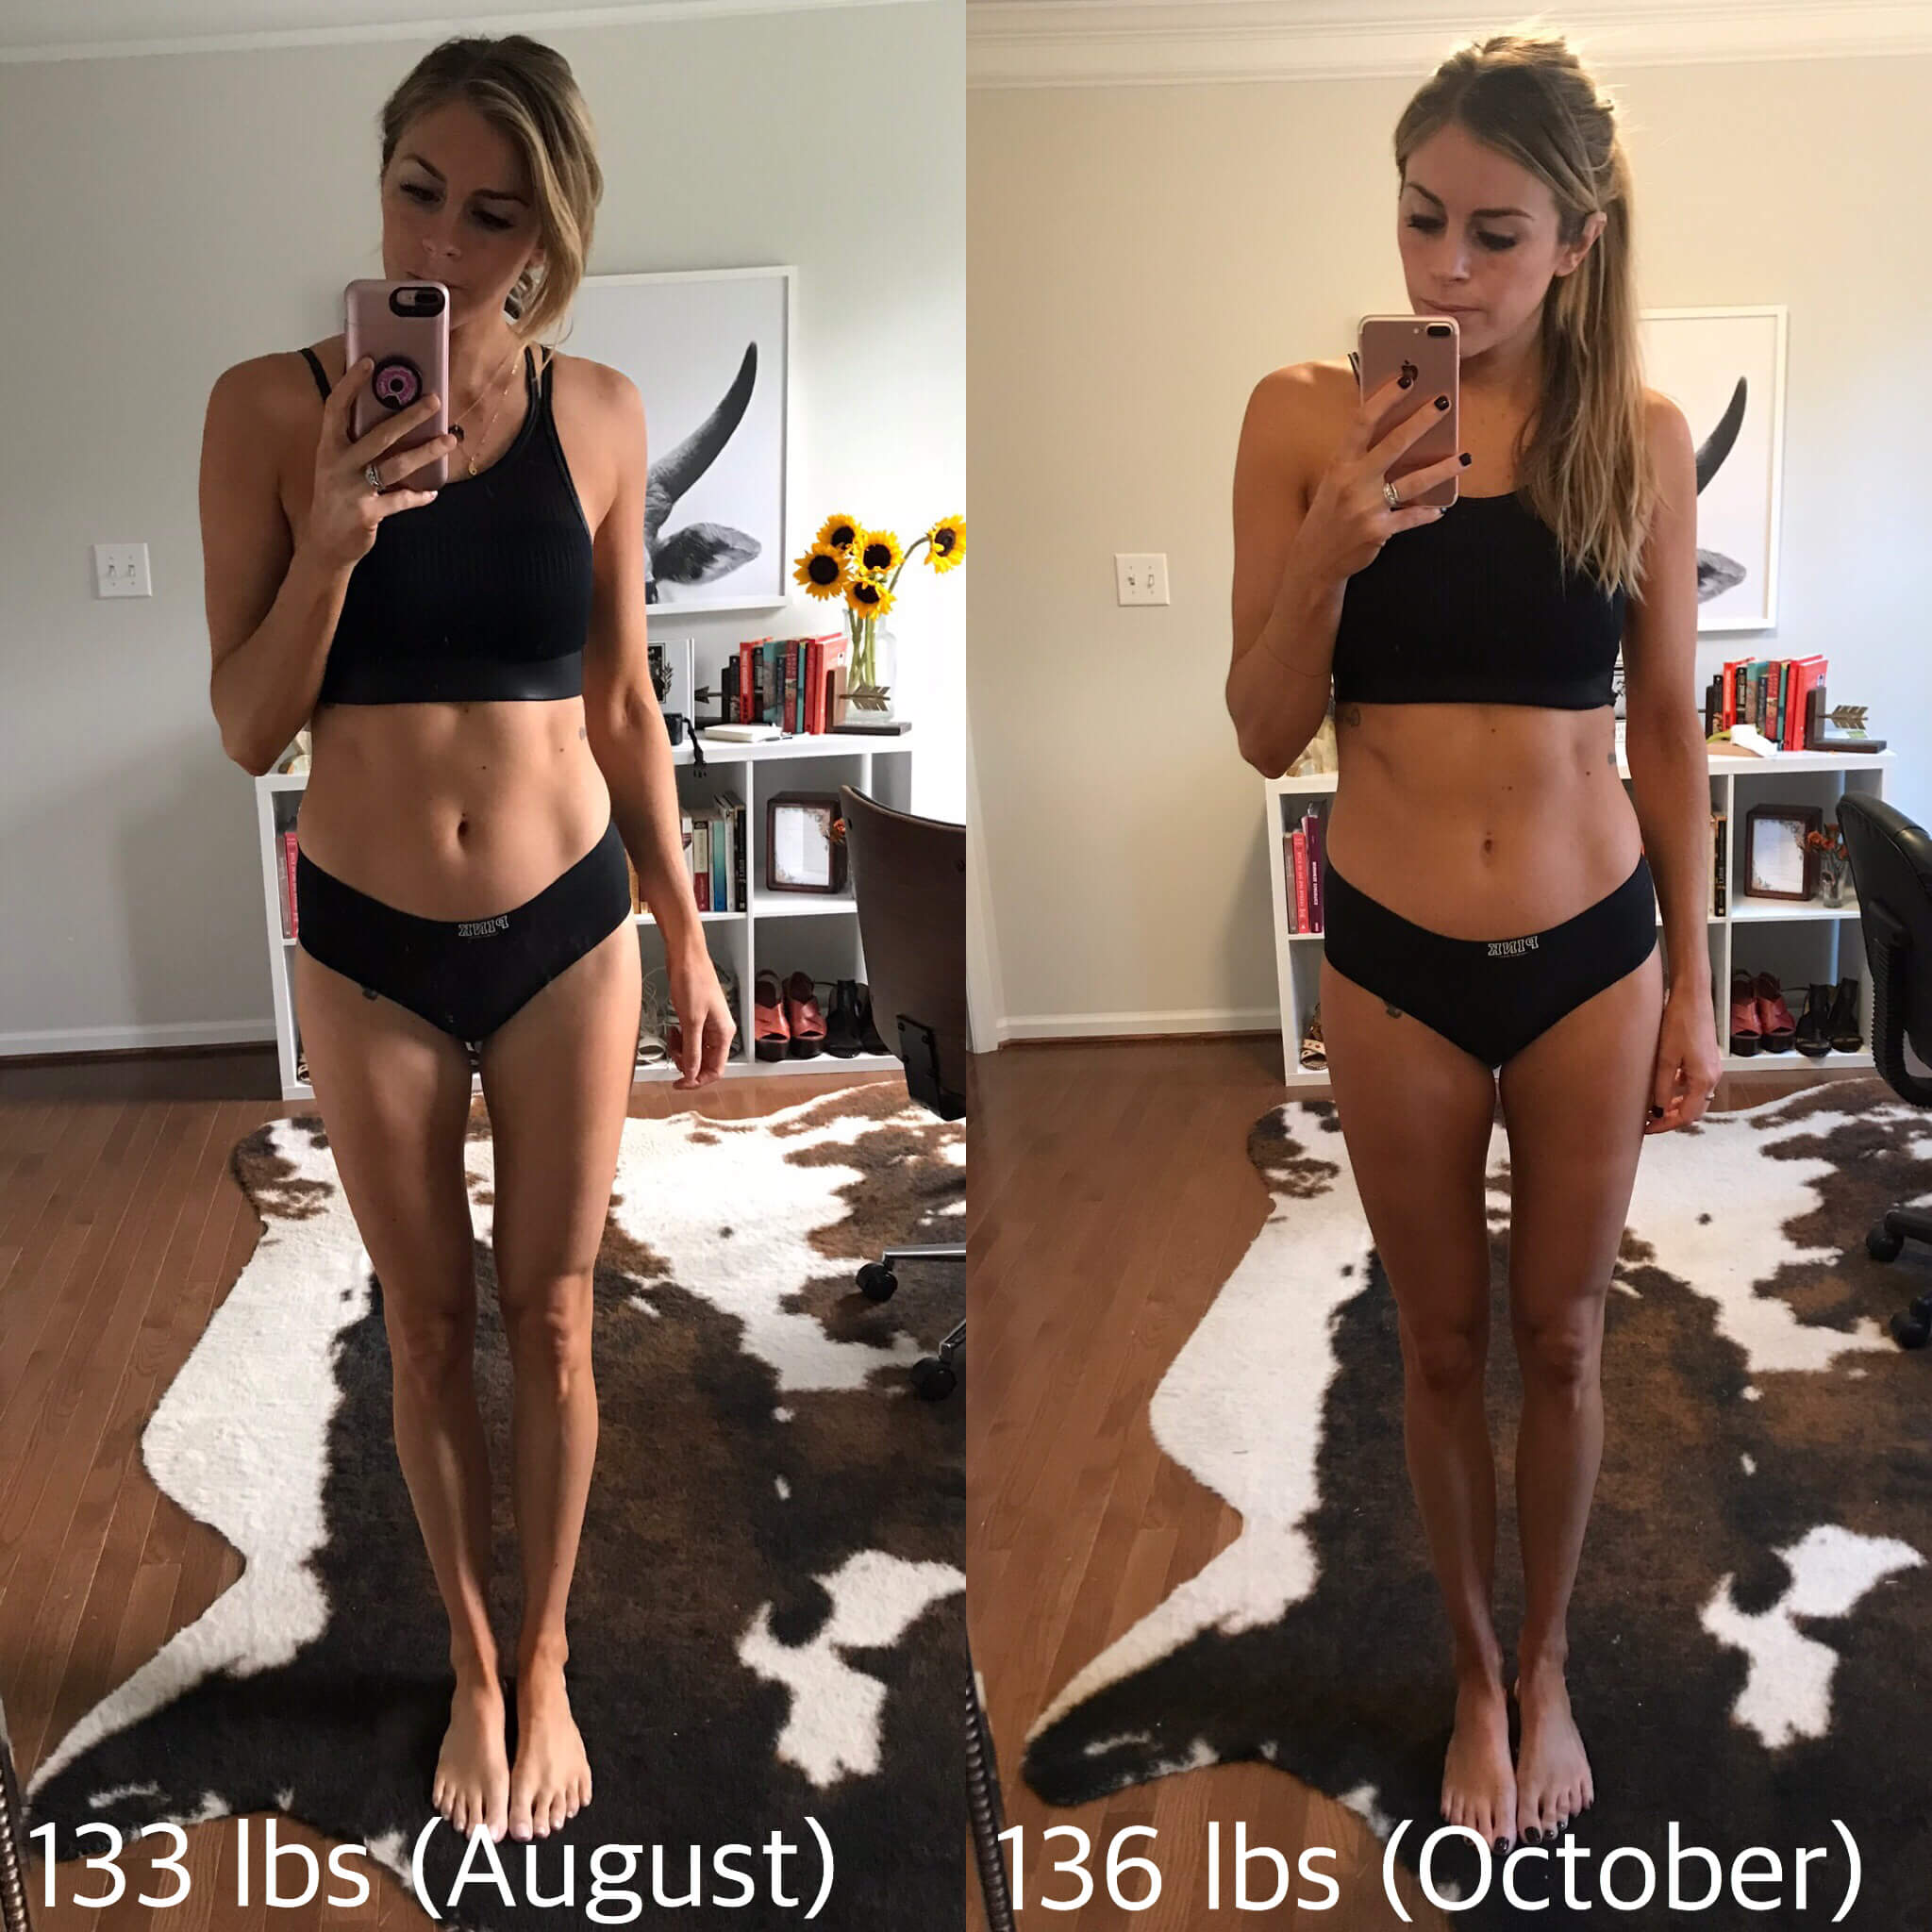 My Experience With Bulking & Why I Stopped - Claire Guentz